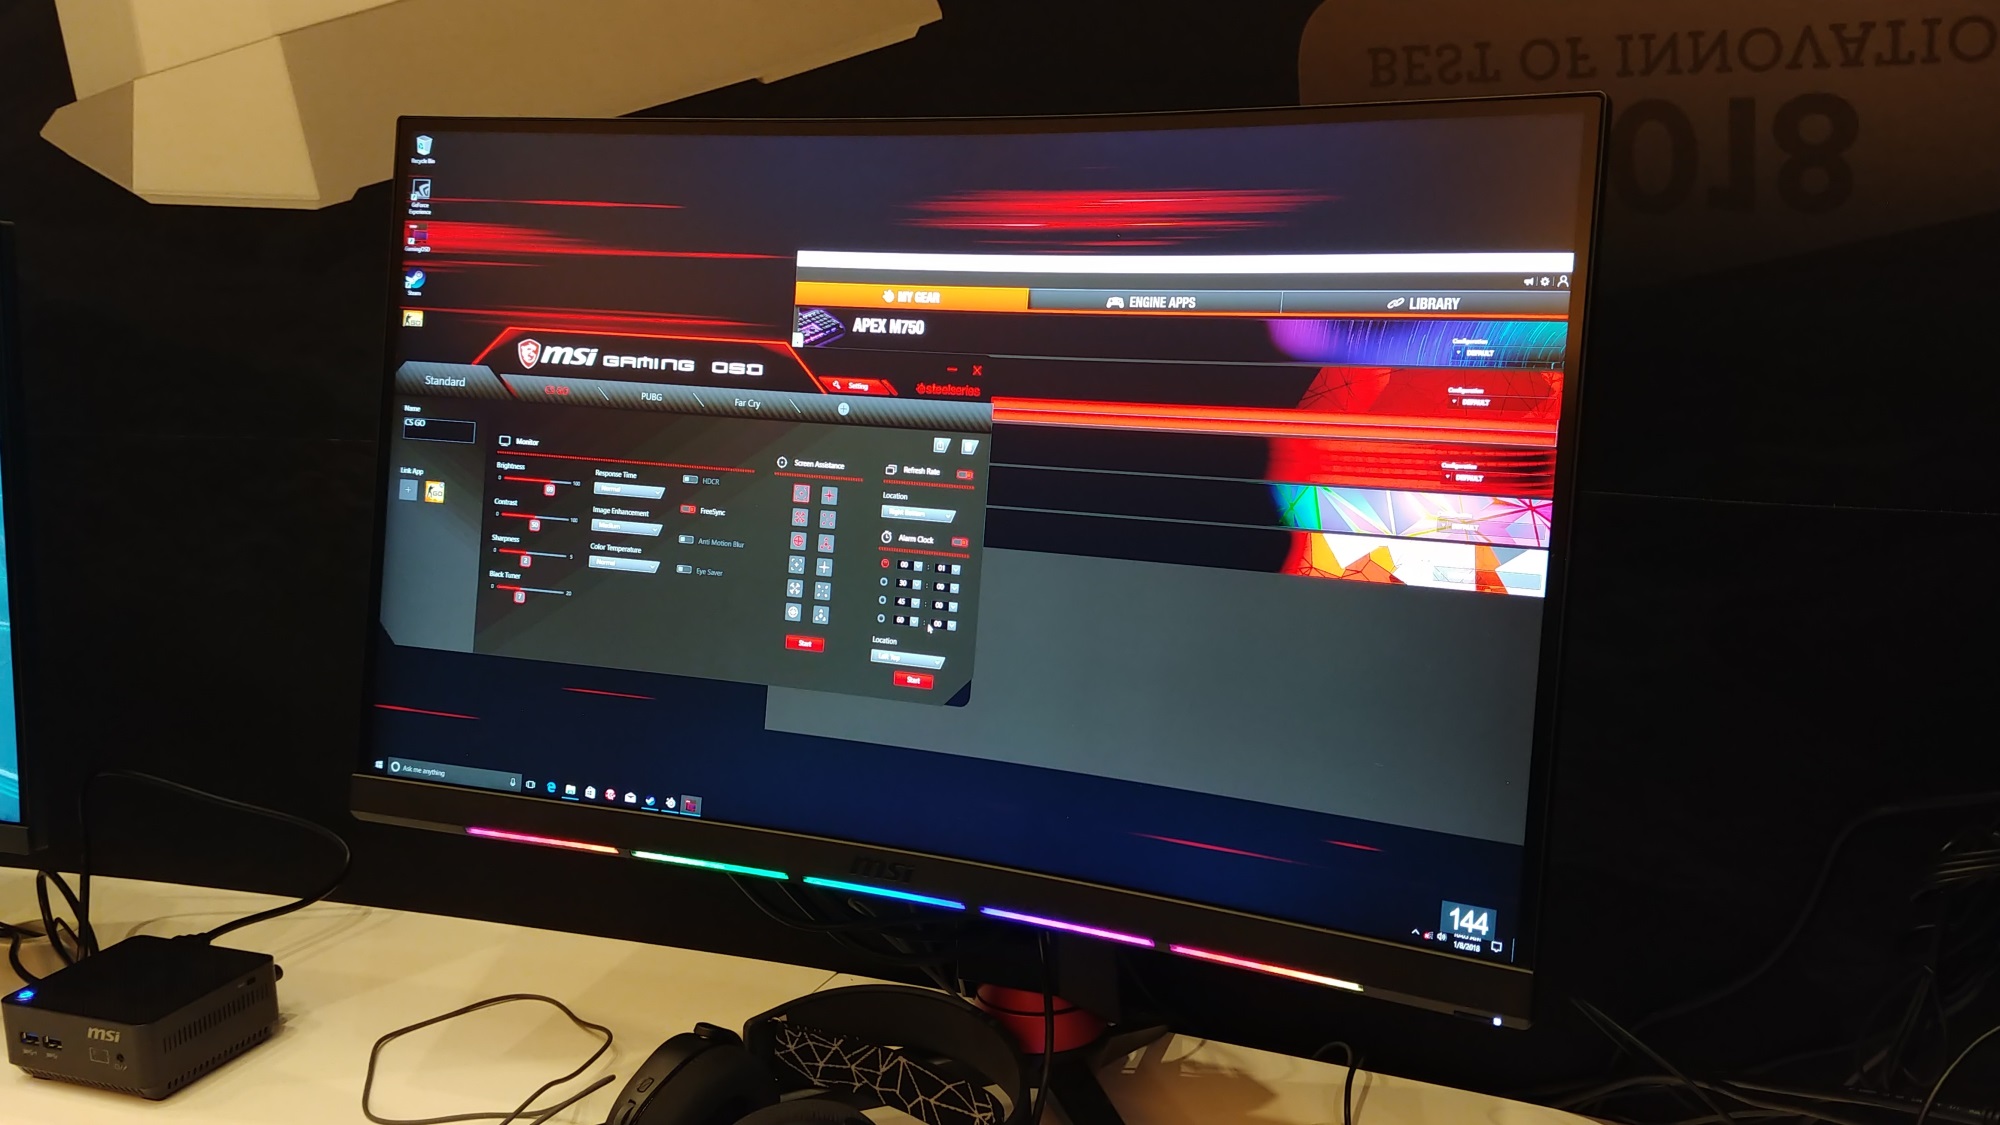 Msi At Ces 18 New Optix Mpg Series Monitors 27 Curved Va Panels Up To 144 Hz Refresh And Rgb Led